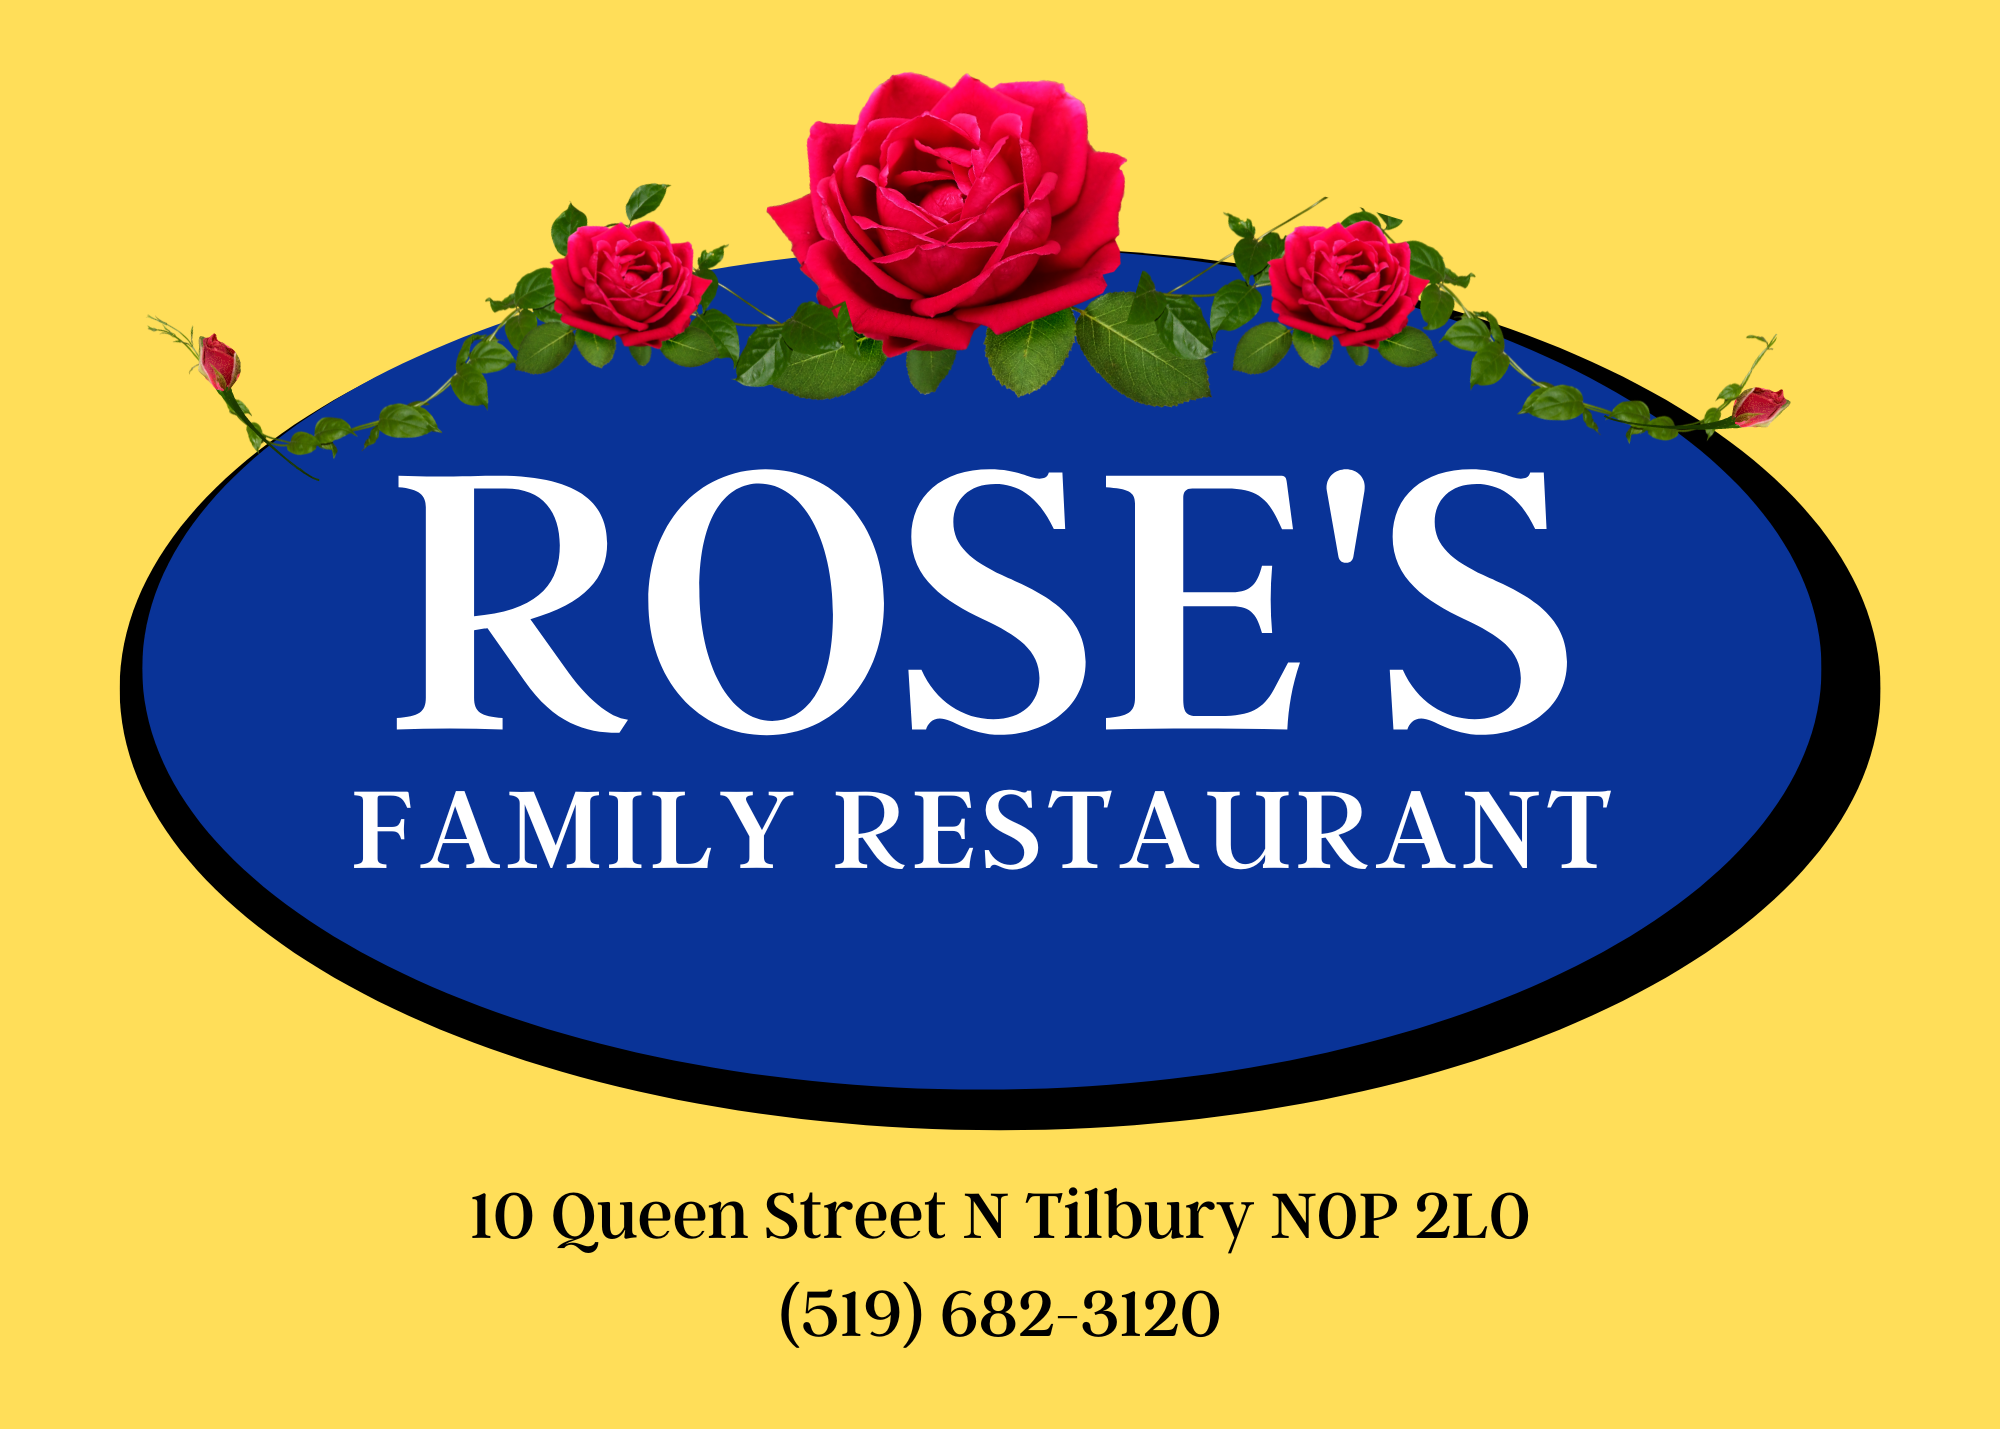 rose's family restaurant logo yellow and blue with red rose's